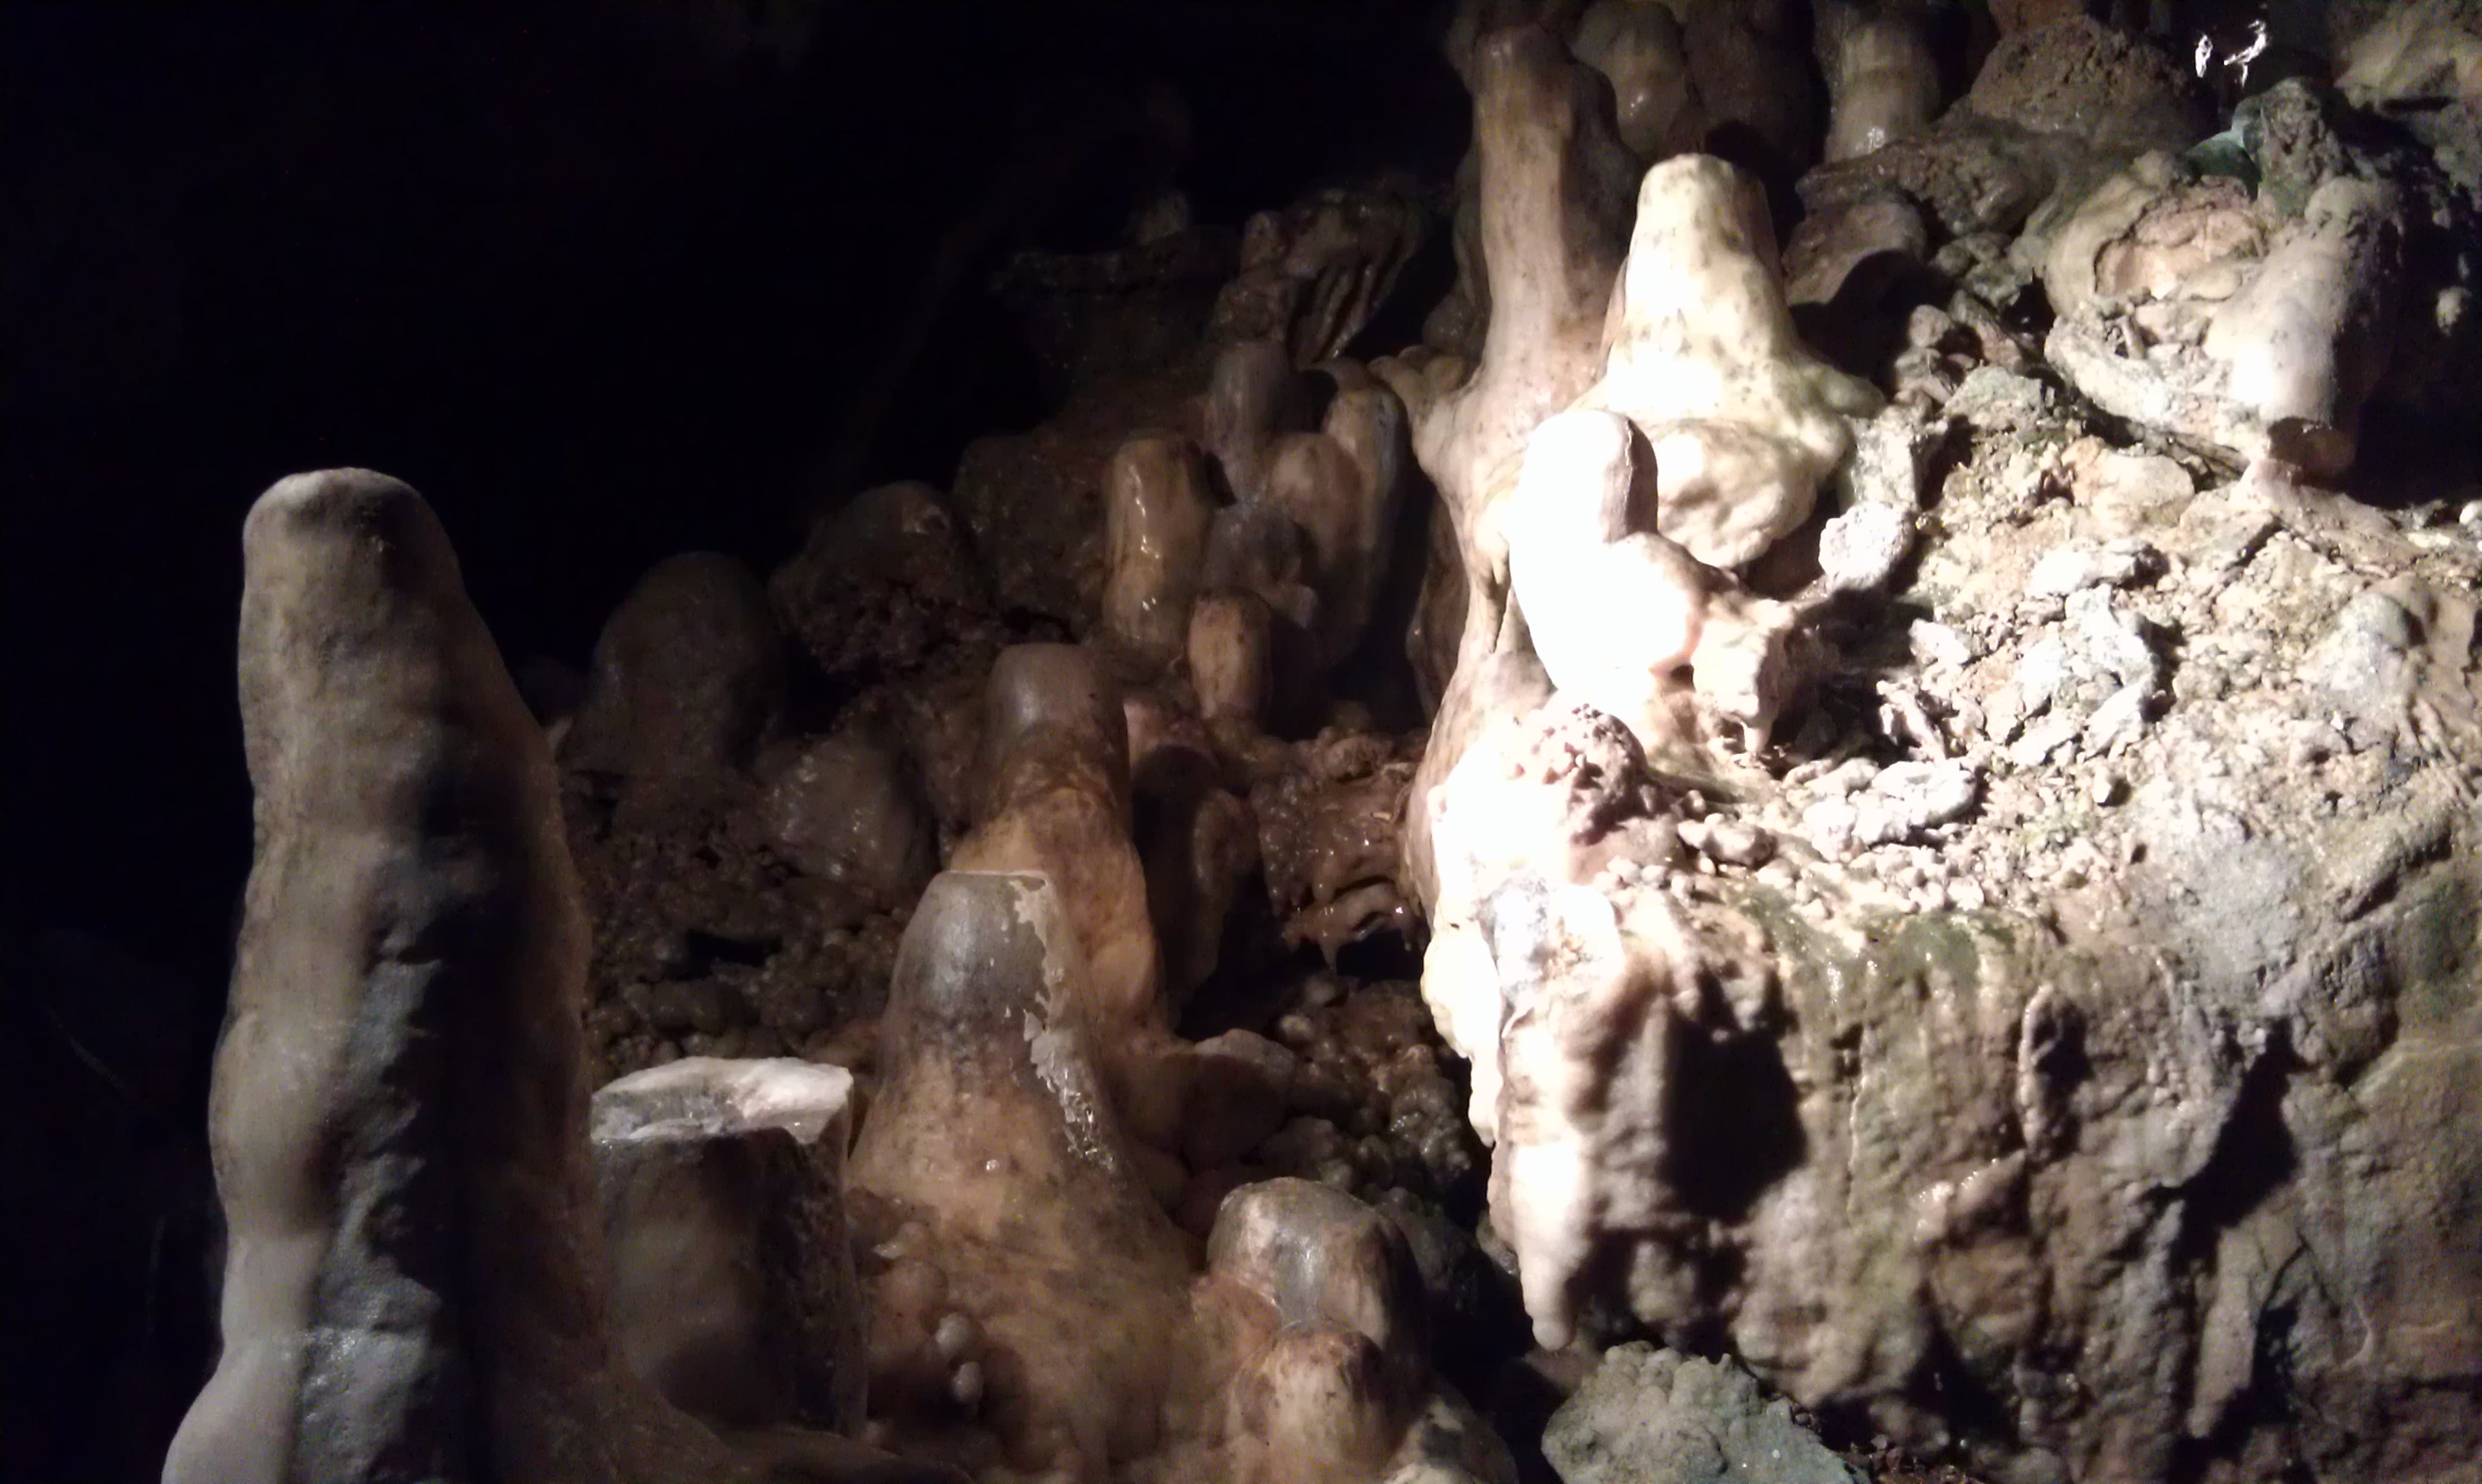 Photo 2 from Crystal-cave